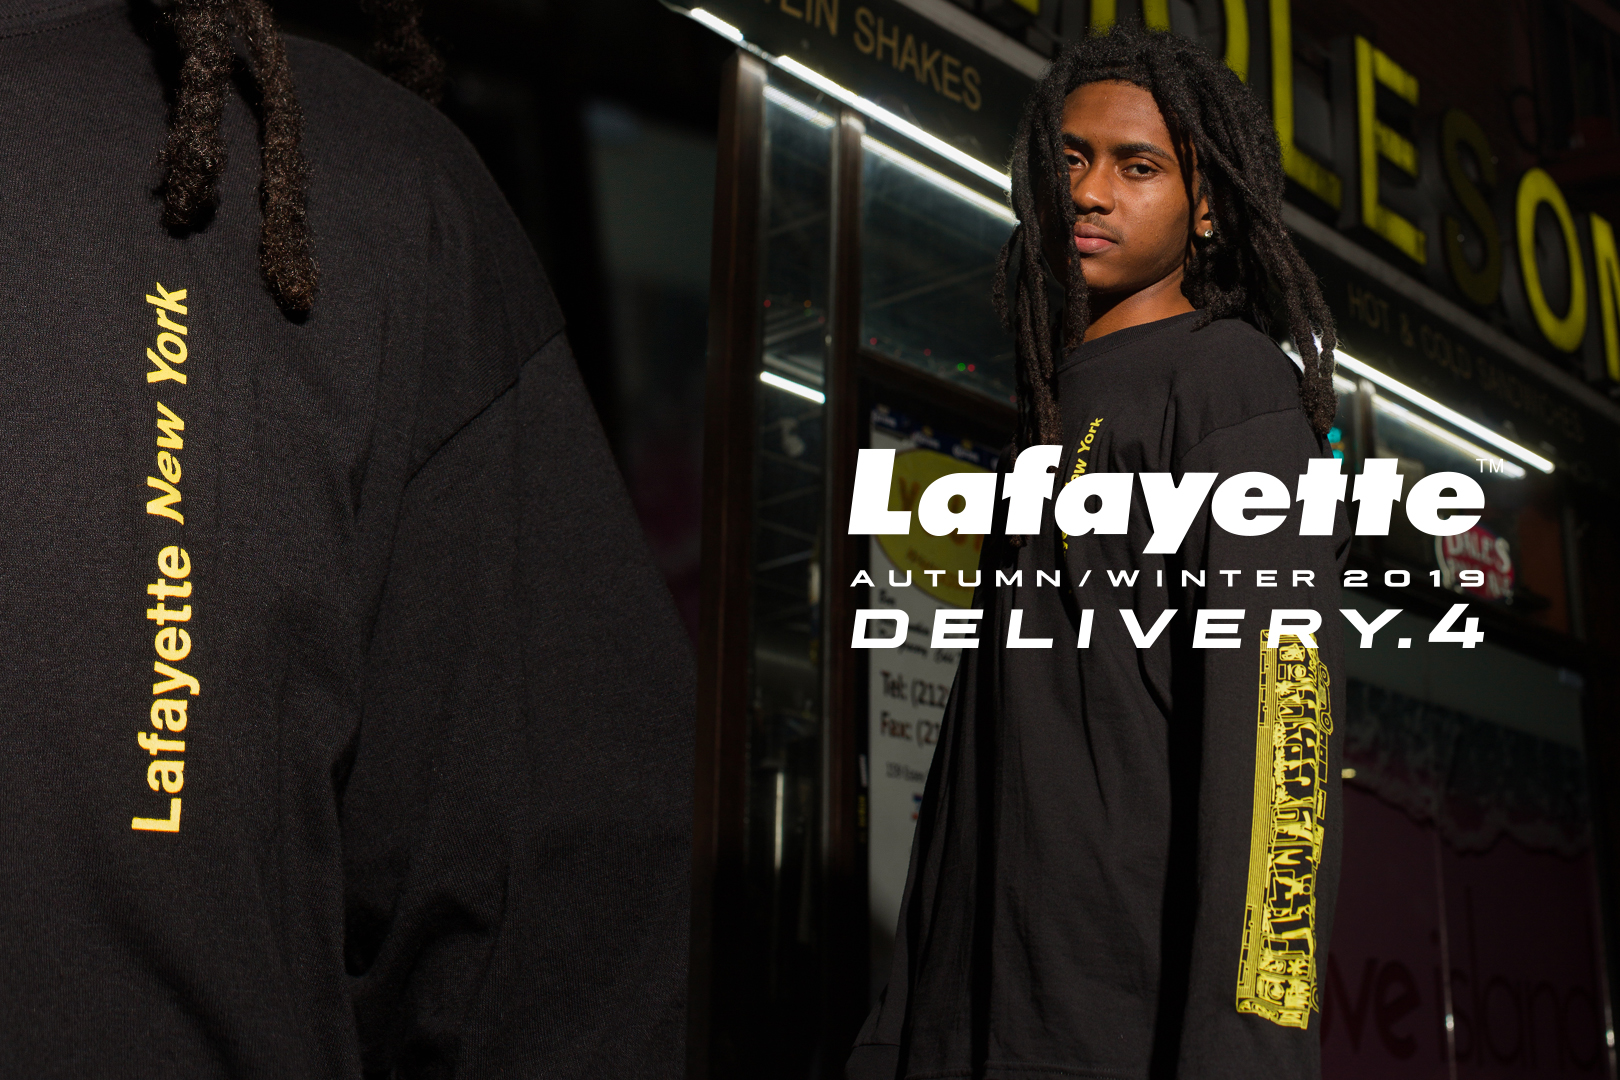 Lafayette 2019 Autumn/Winter Collection Delivery.4